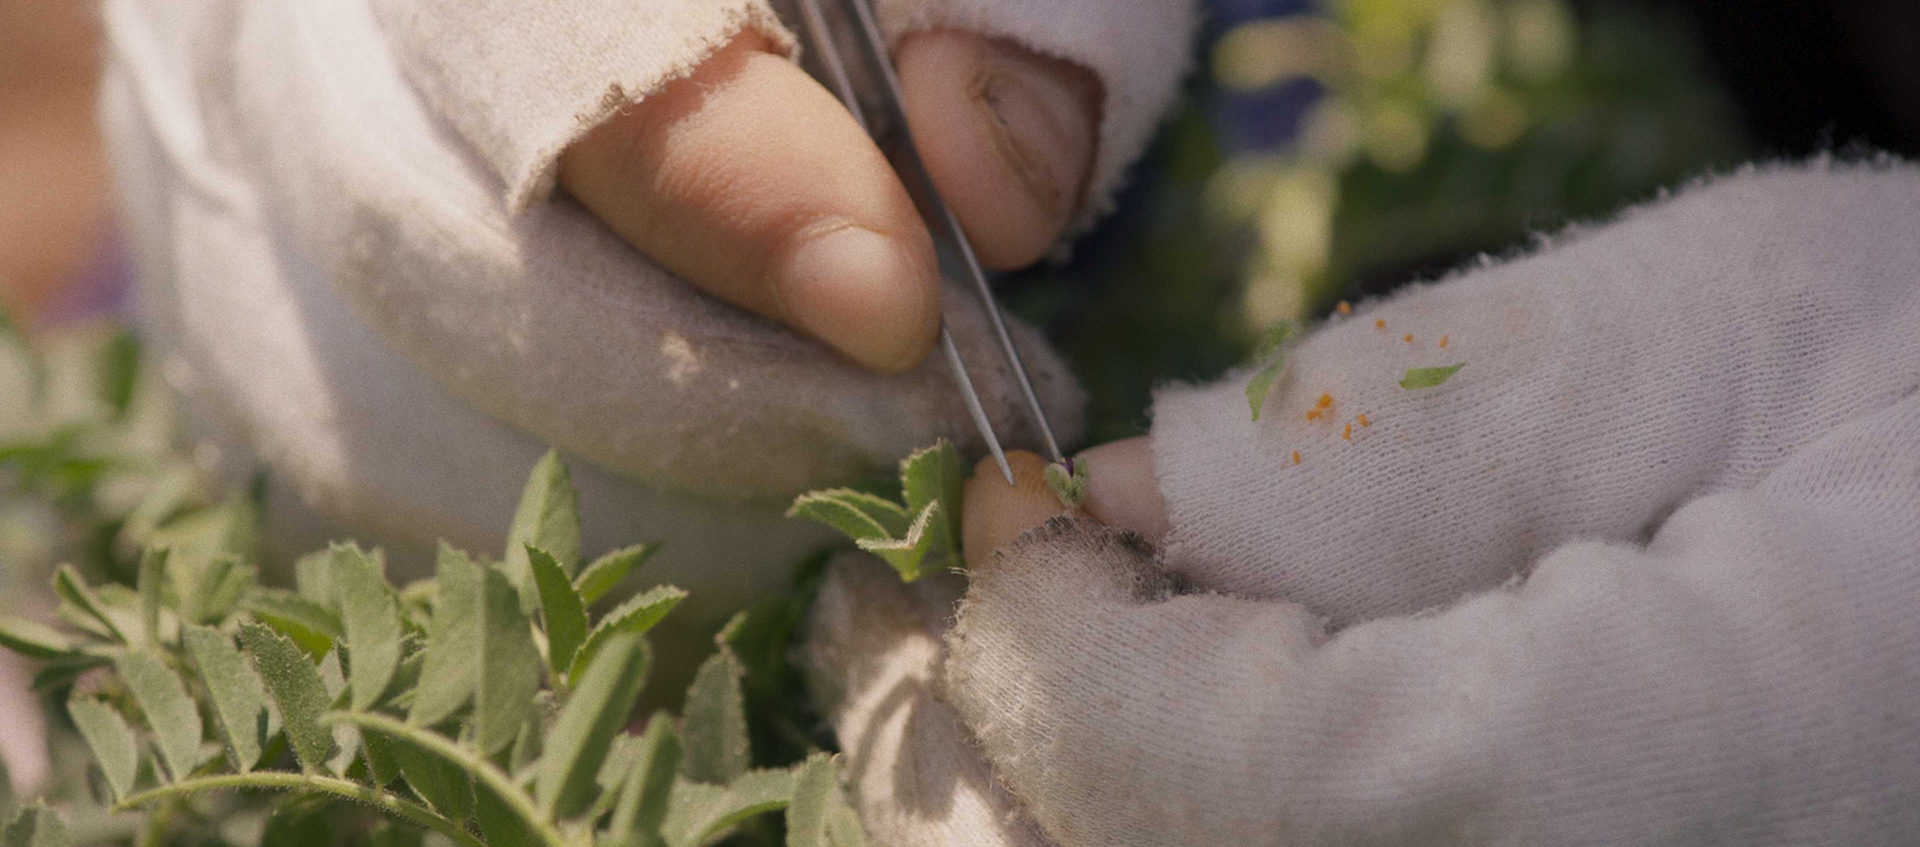 Detail of a pair of hands in modified gloves using tweezers to cross-pollinate a pair of plants. The gloves are stained with dirt and plant matter.